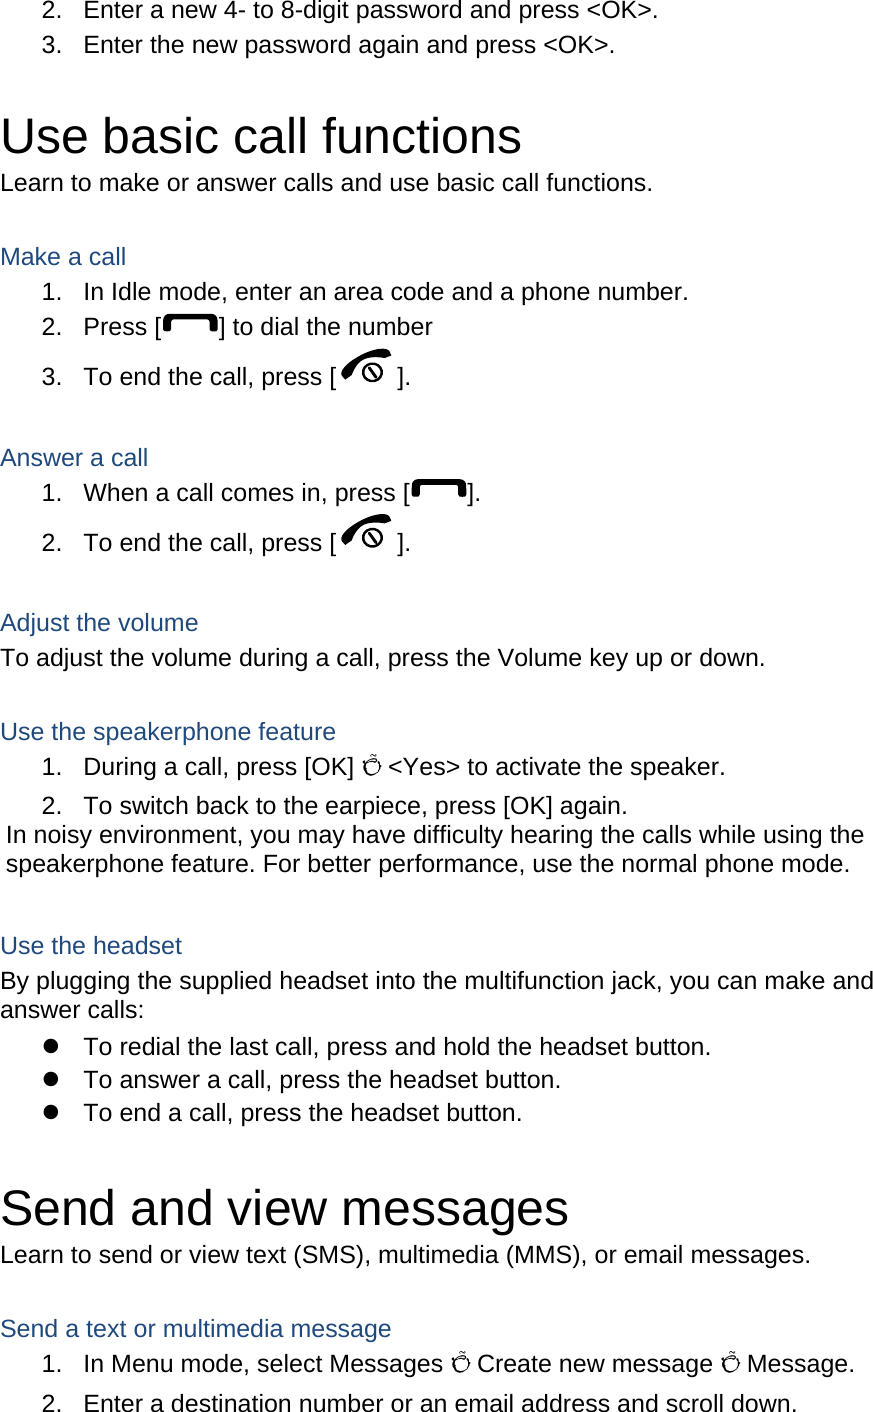 2.  Enter a new 4- to 8-digit password and press &lt;OK&gt;. 3.  Enter the new password again and press &lt;OK&gt;.  Use basic call functions Learn to make or answer calls and use basic call functions.  Make a call 1.  In Idle mode, enter an area code and a phone number. 2. Press [ ] to dial the number 3.  To end the call, press [ ].   Answer a call 1.  When a call comes in, press [ ]. 2.  To end the call, press [ ].  Adjust the volume To adjust the volume during a call, press the Volume key up or down.  Use the speakerphone feature 1.  During a call, press [OK] Õ &lt;Yes&gt; to activate the speaker. 2.  To switch back to the earpiece, press [OK] again. In noisy environment, you may have difficulty hearing the calls while using the speakerphone feature. For better performance, use the normal phone mode.  Use the headset By plugging the supplied headset into the multifunction jack, you can make and answer calls: z  To redial the last call, press and hold the headset button. z  To answer a call, press the headset button. z  To end a call, press the headset button.  Send and view messages Learn to send or view text (SMS), multimedia (MMS), or email messages.  Send a text or multimedia message 1.  In Menu mode, select Messages Õ Create new message Õ Message. 2.  Enter a destination number or an email address and scroll down. 